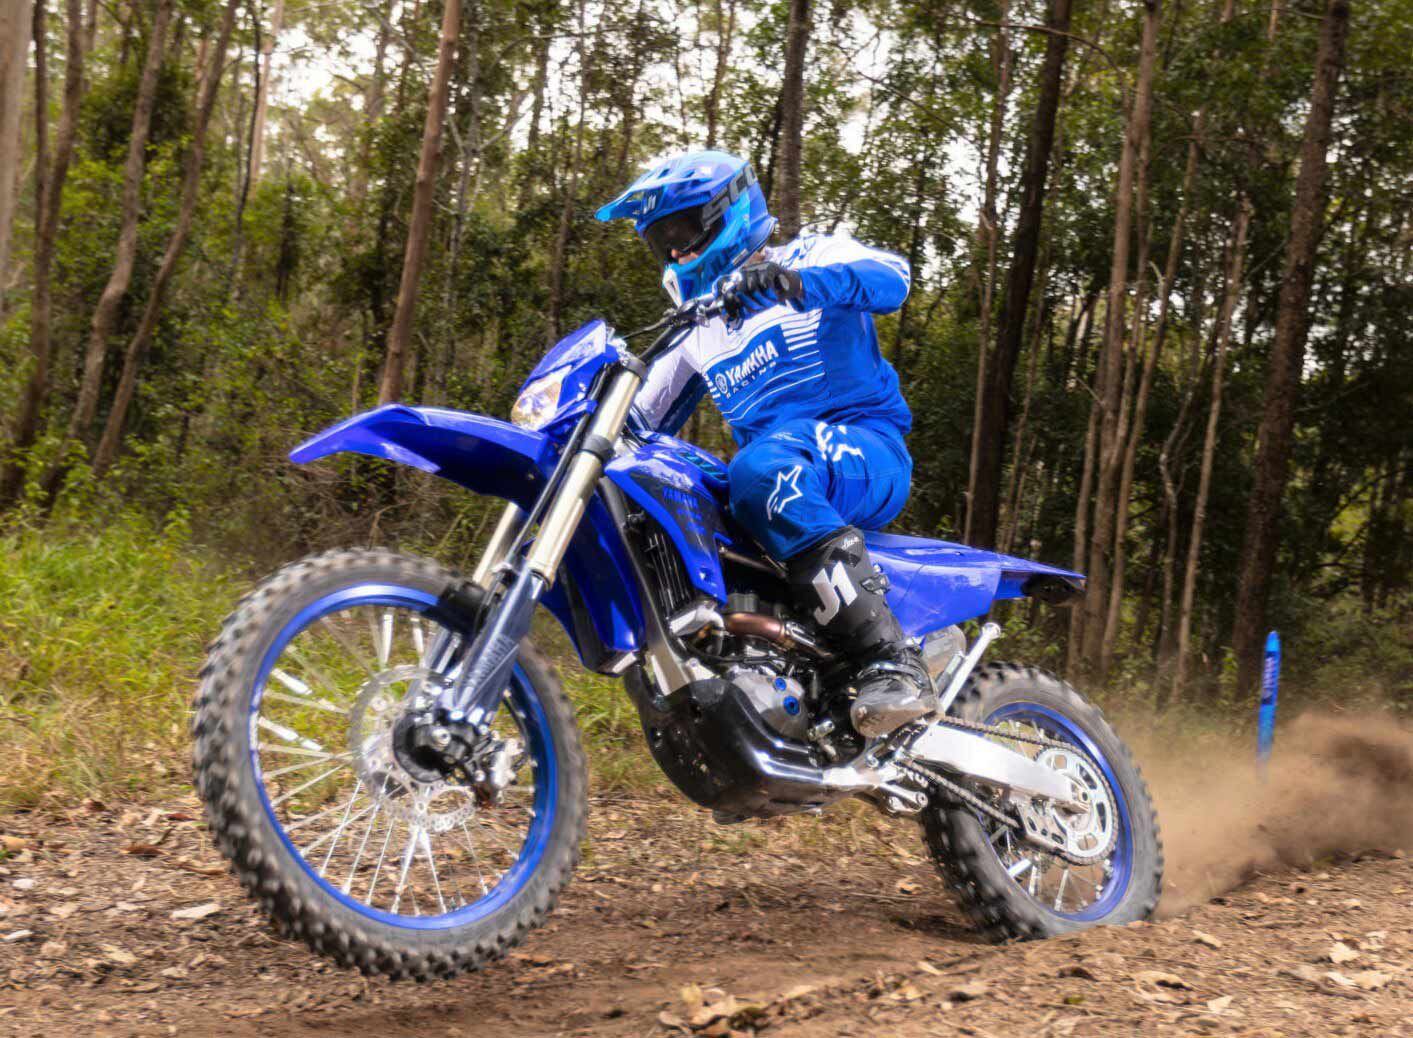 Yamaha has unveiled the redesigned WR450F enduro for 2024. MSRP is $10,199 (European model shown).